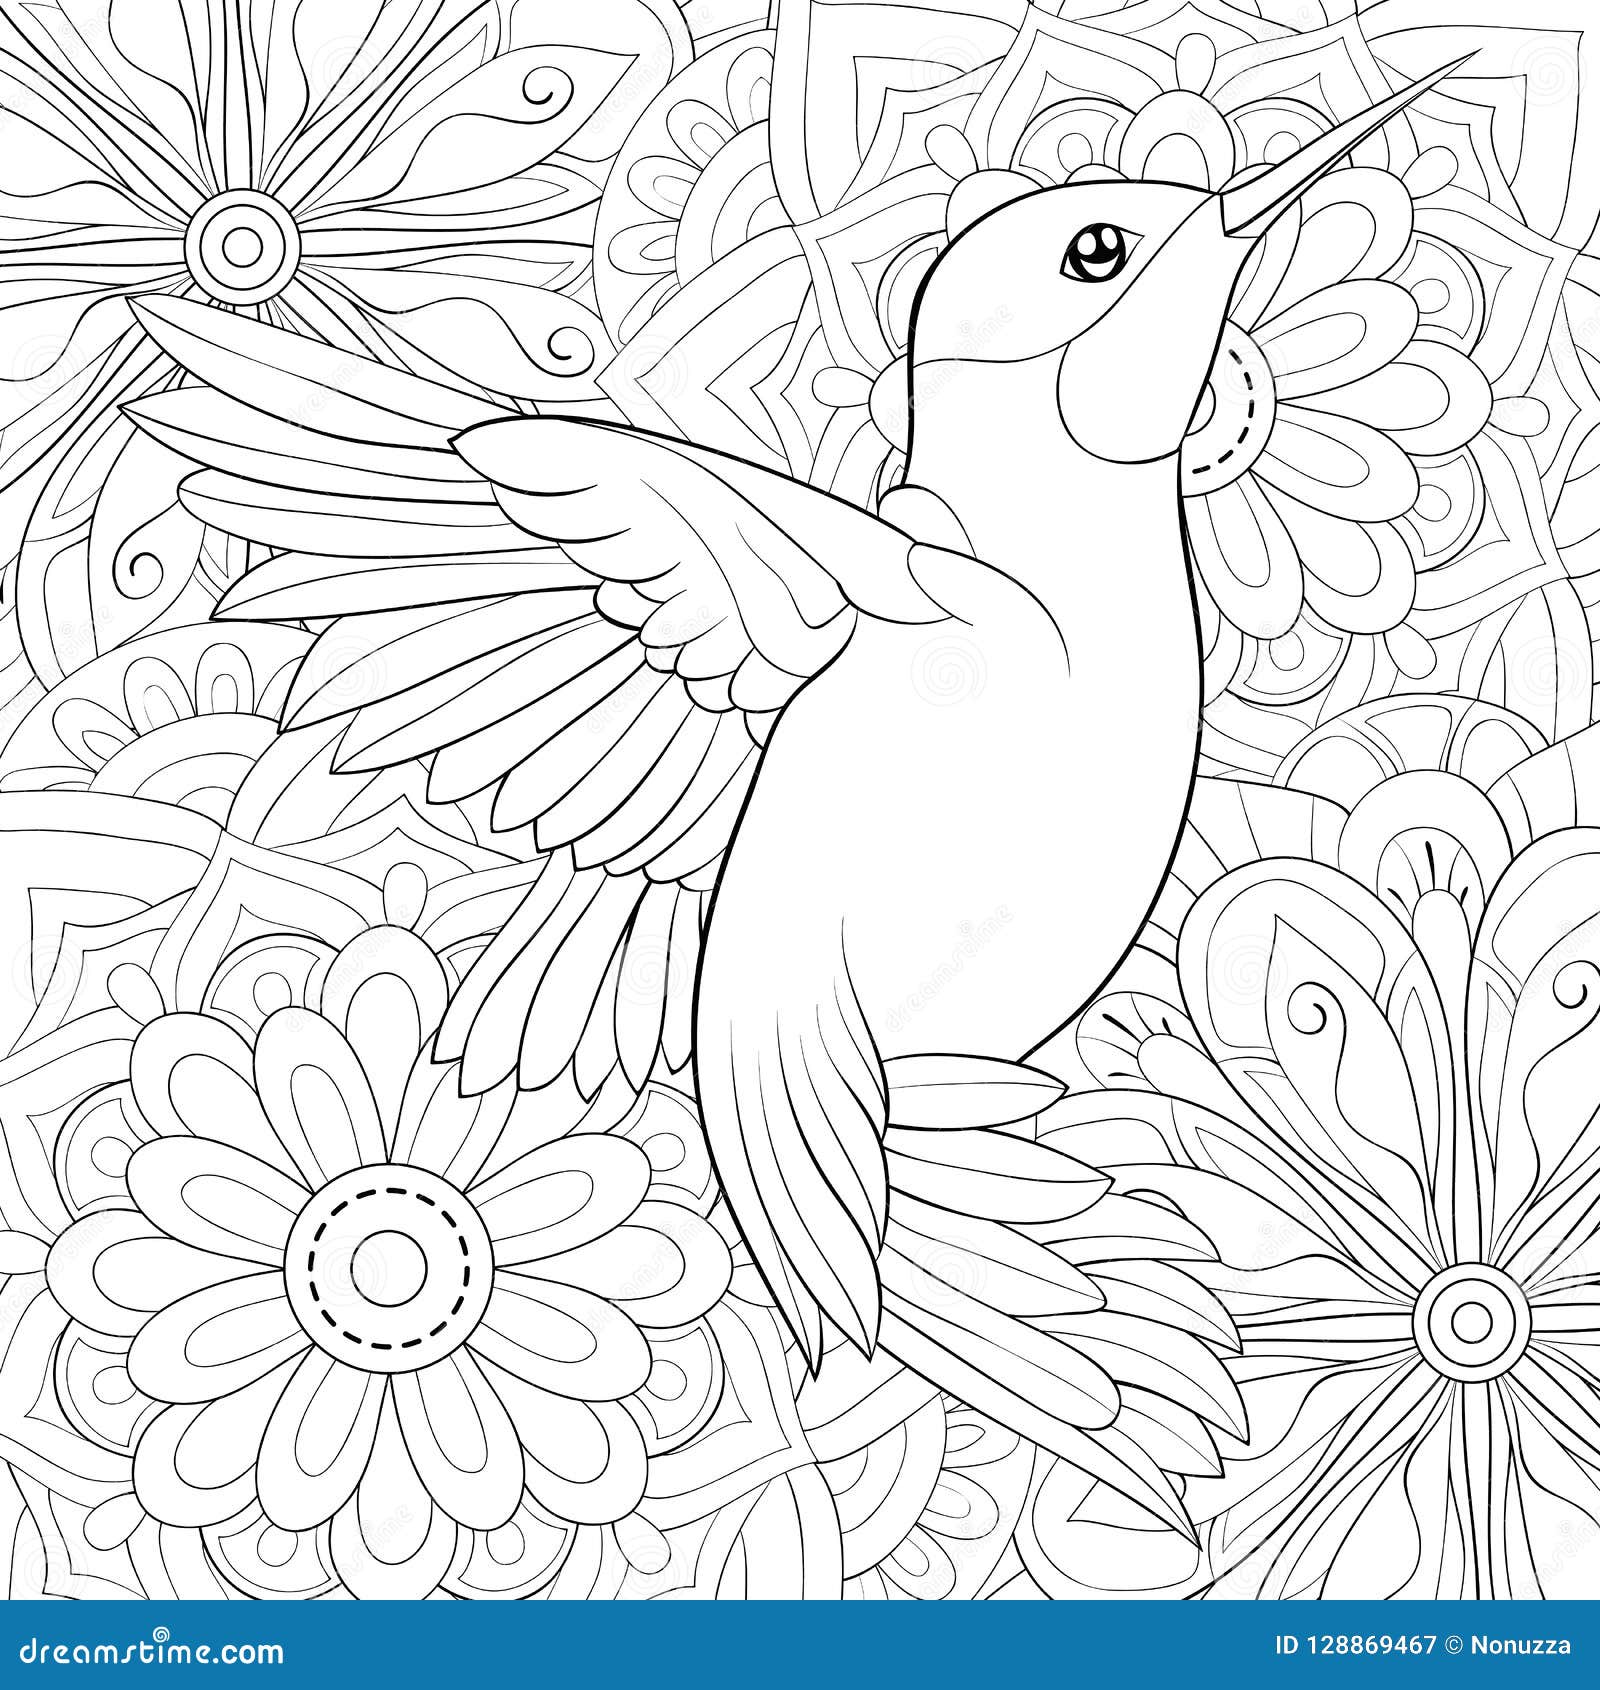 Adult coloring bookpage a cute bird for relaxingzen art style illustration stock vector